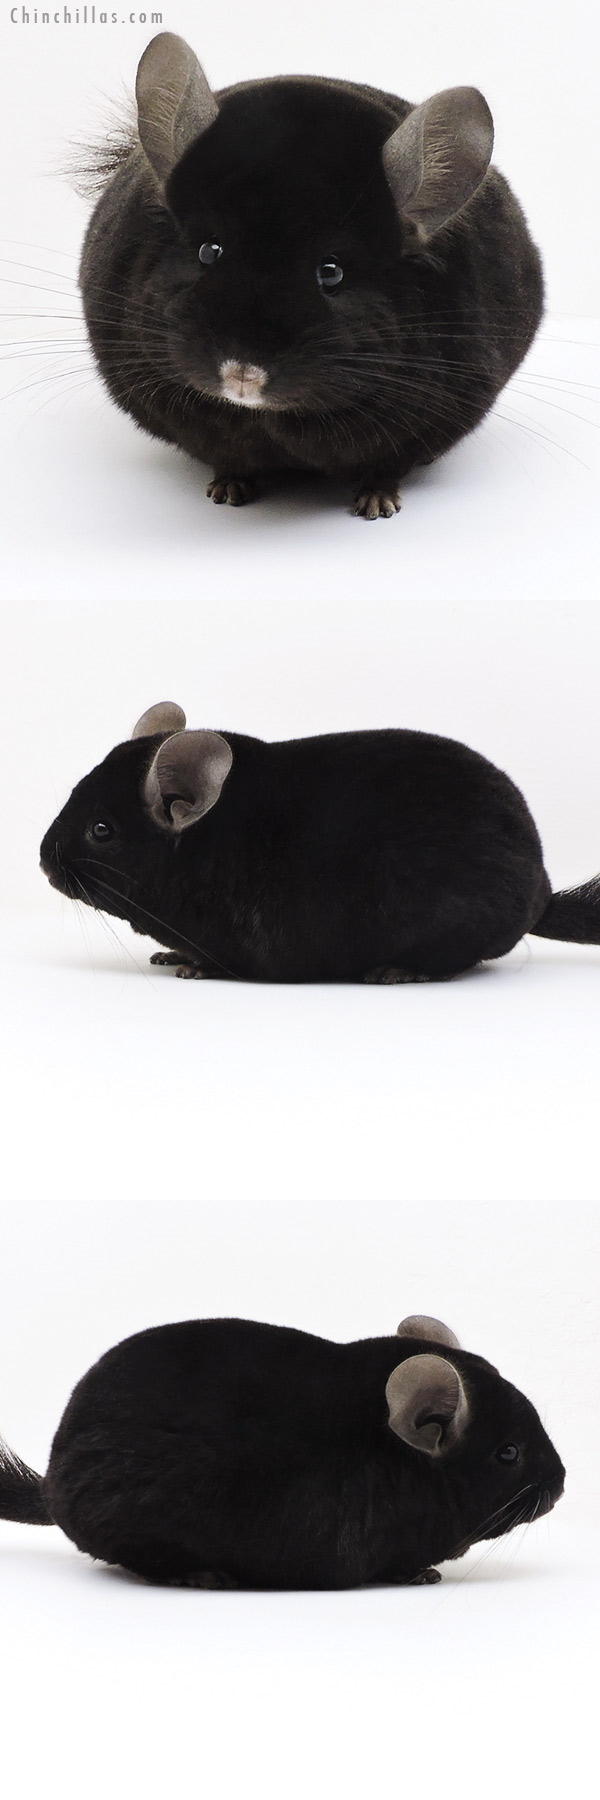 Chinchilla or related item offered for sale or export on Chinchillas.com - 17341 Blocky Herd Improvement Quality Ebony Male Chinchilla